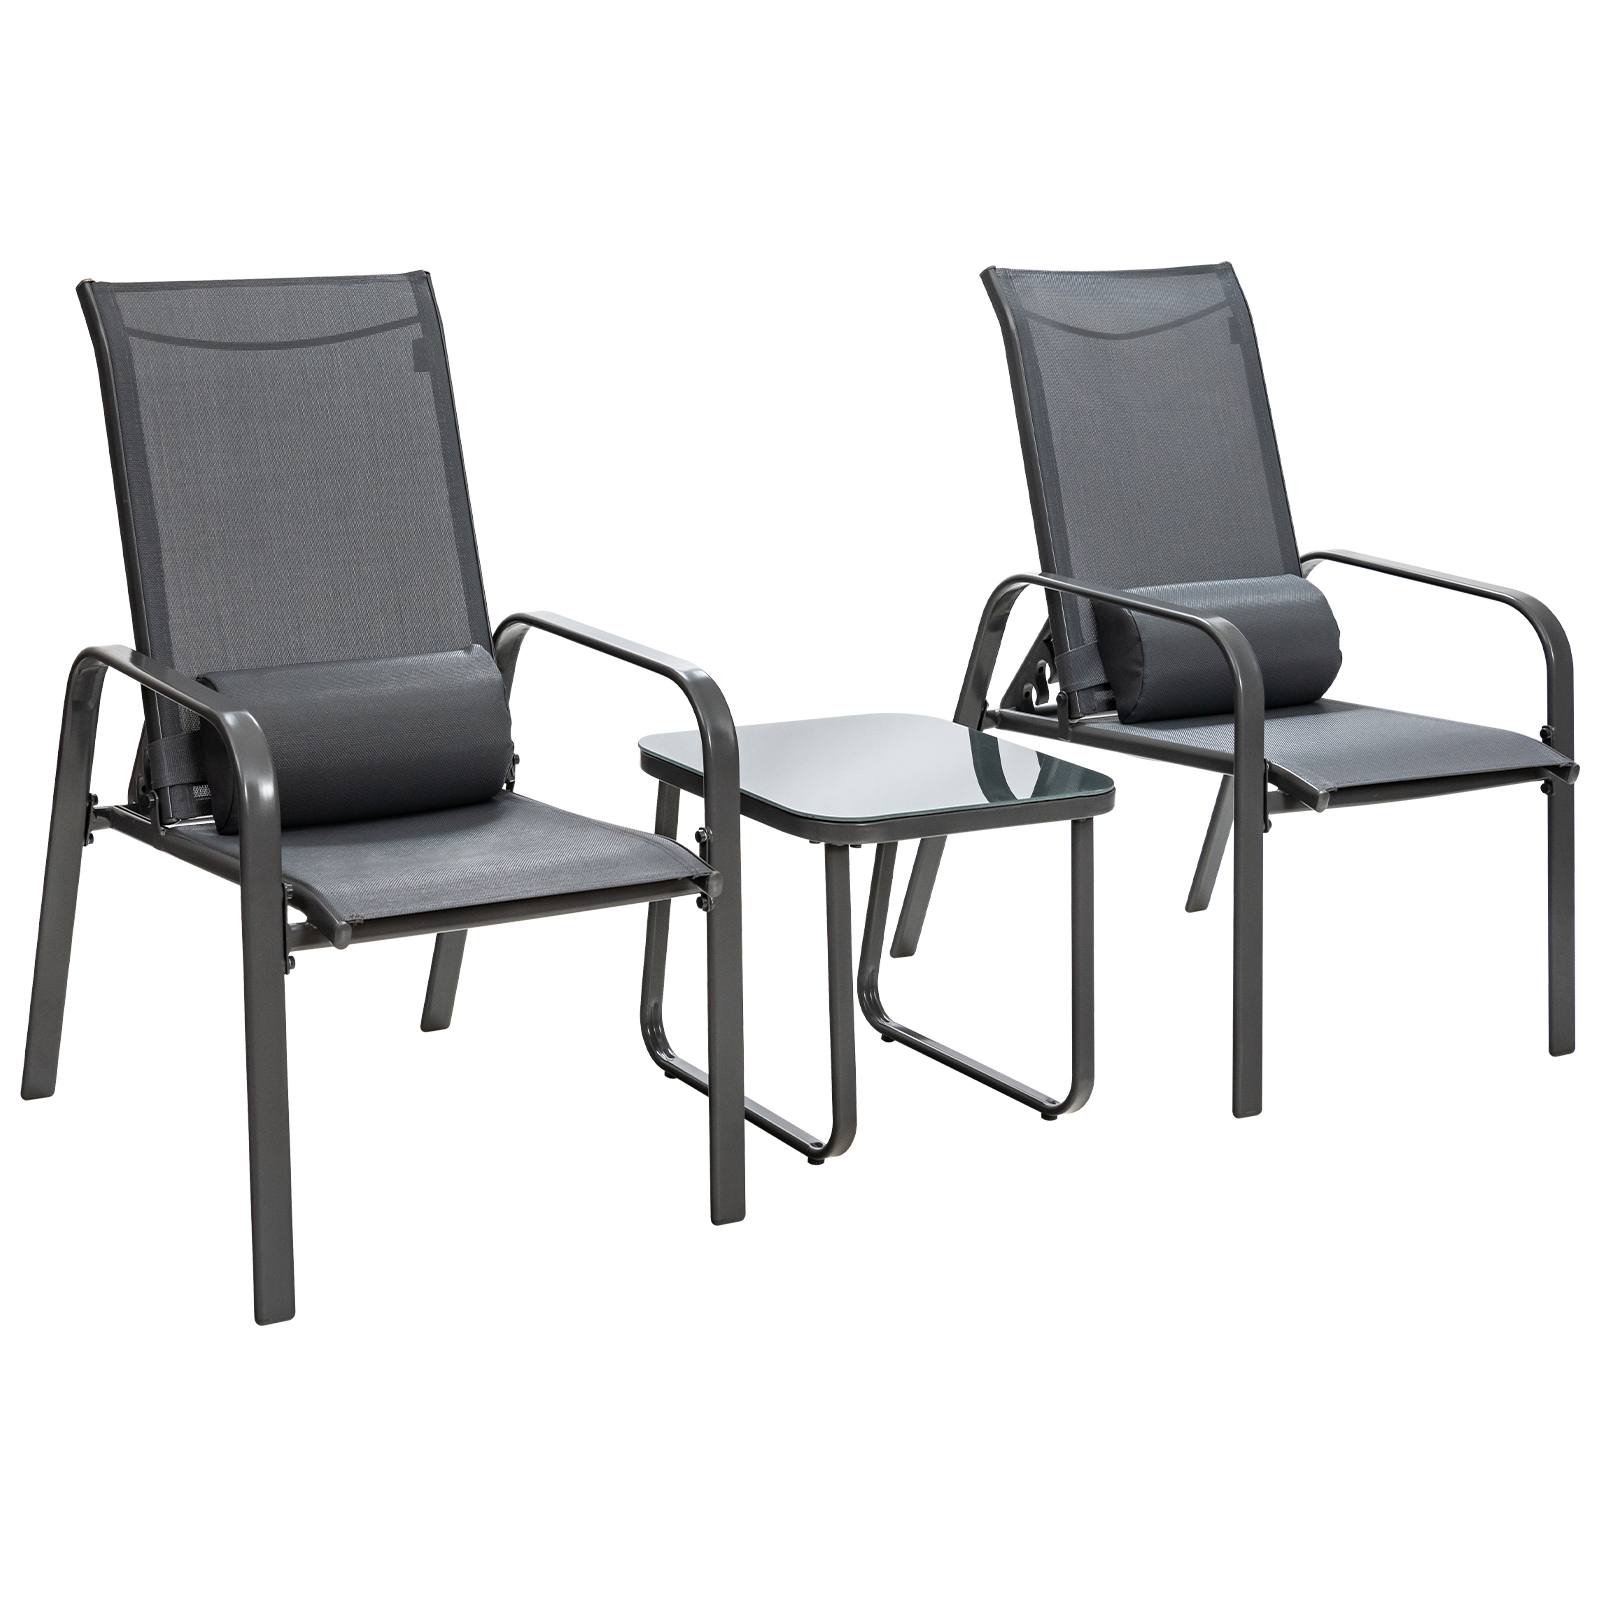 3 Pieces Patio Bistro Set with Coffee Table and 2 Stackable Chairs-Grey